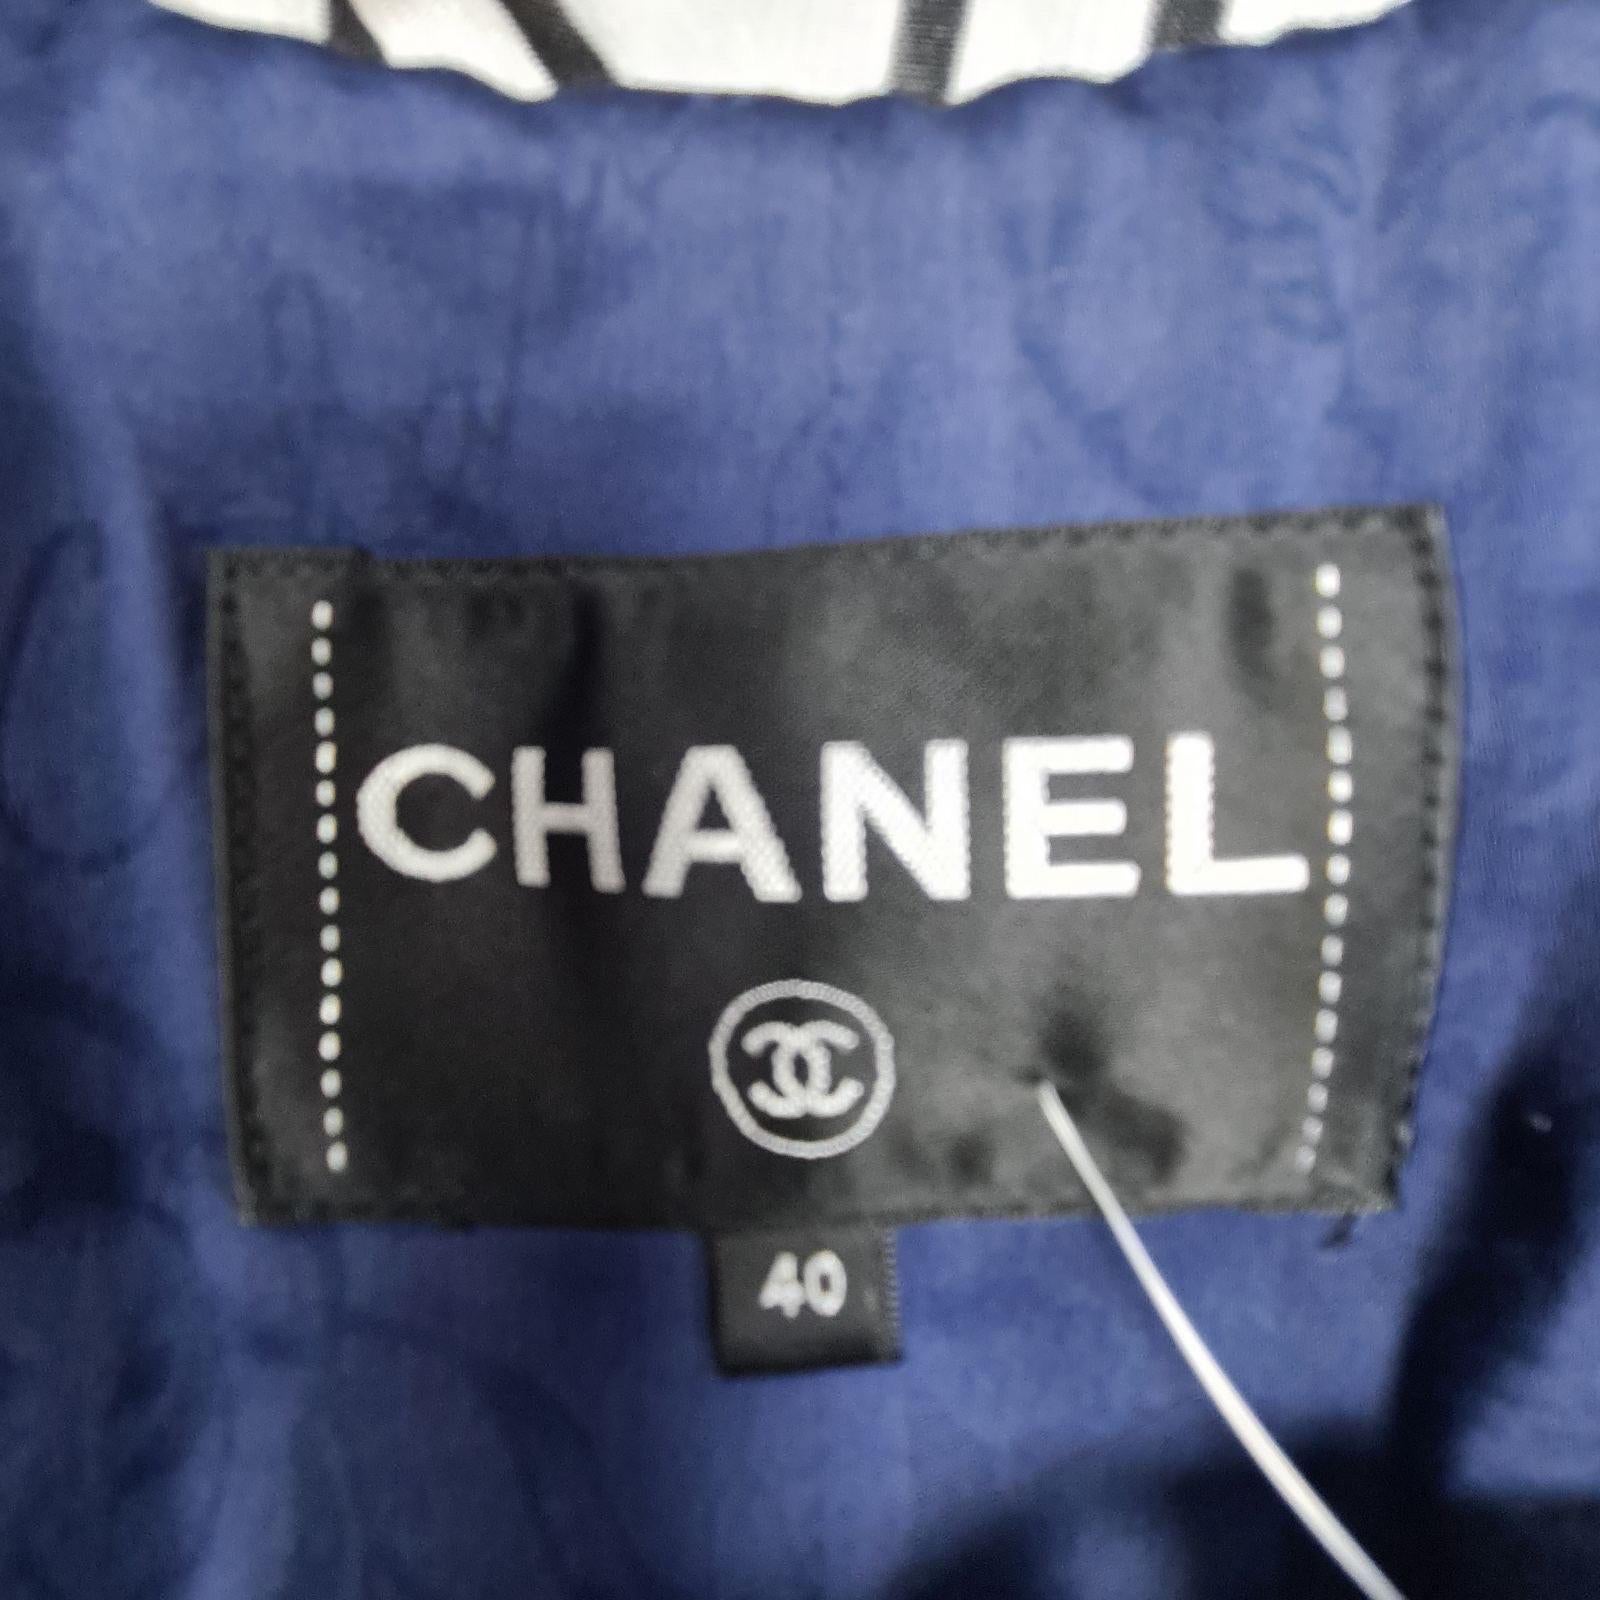 Chanel coat collection 2017 paris cuba

Hanger is not included.
Size 40. Oversized

Condition is very good.